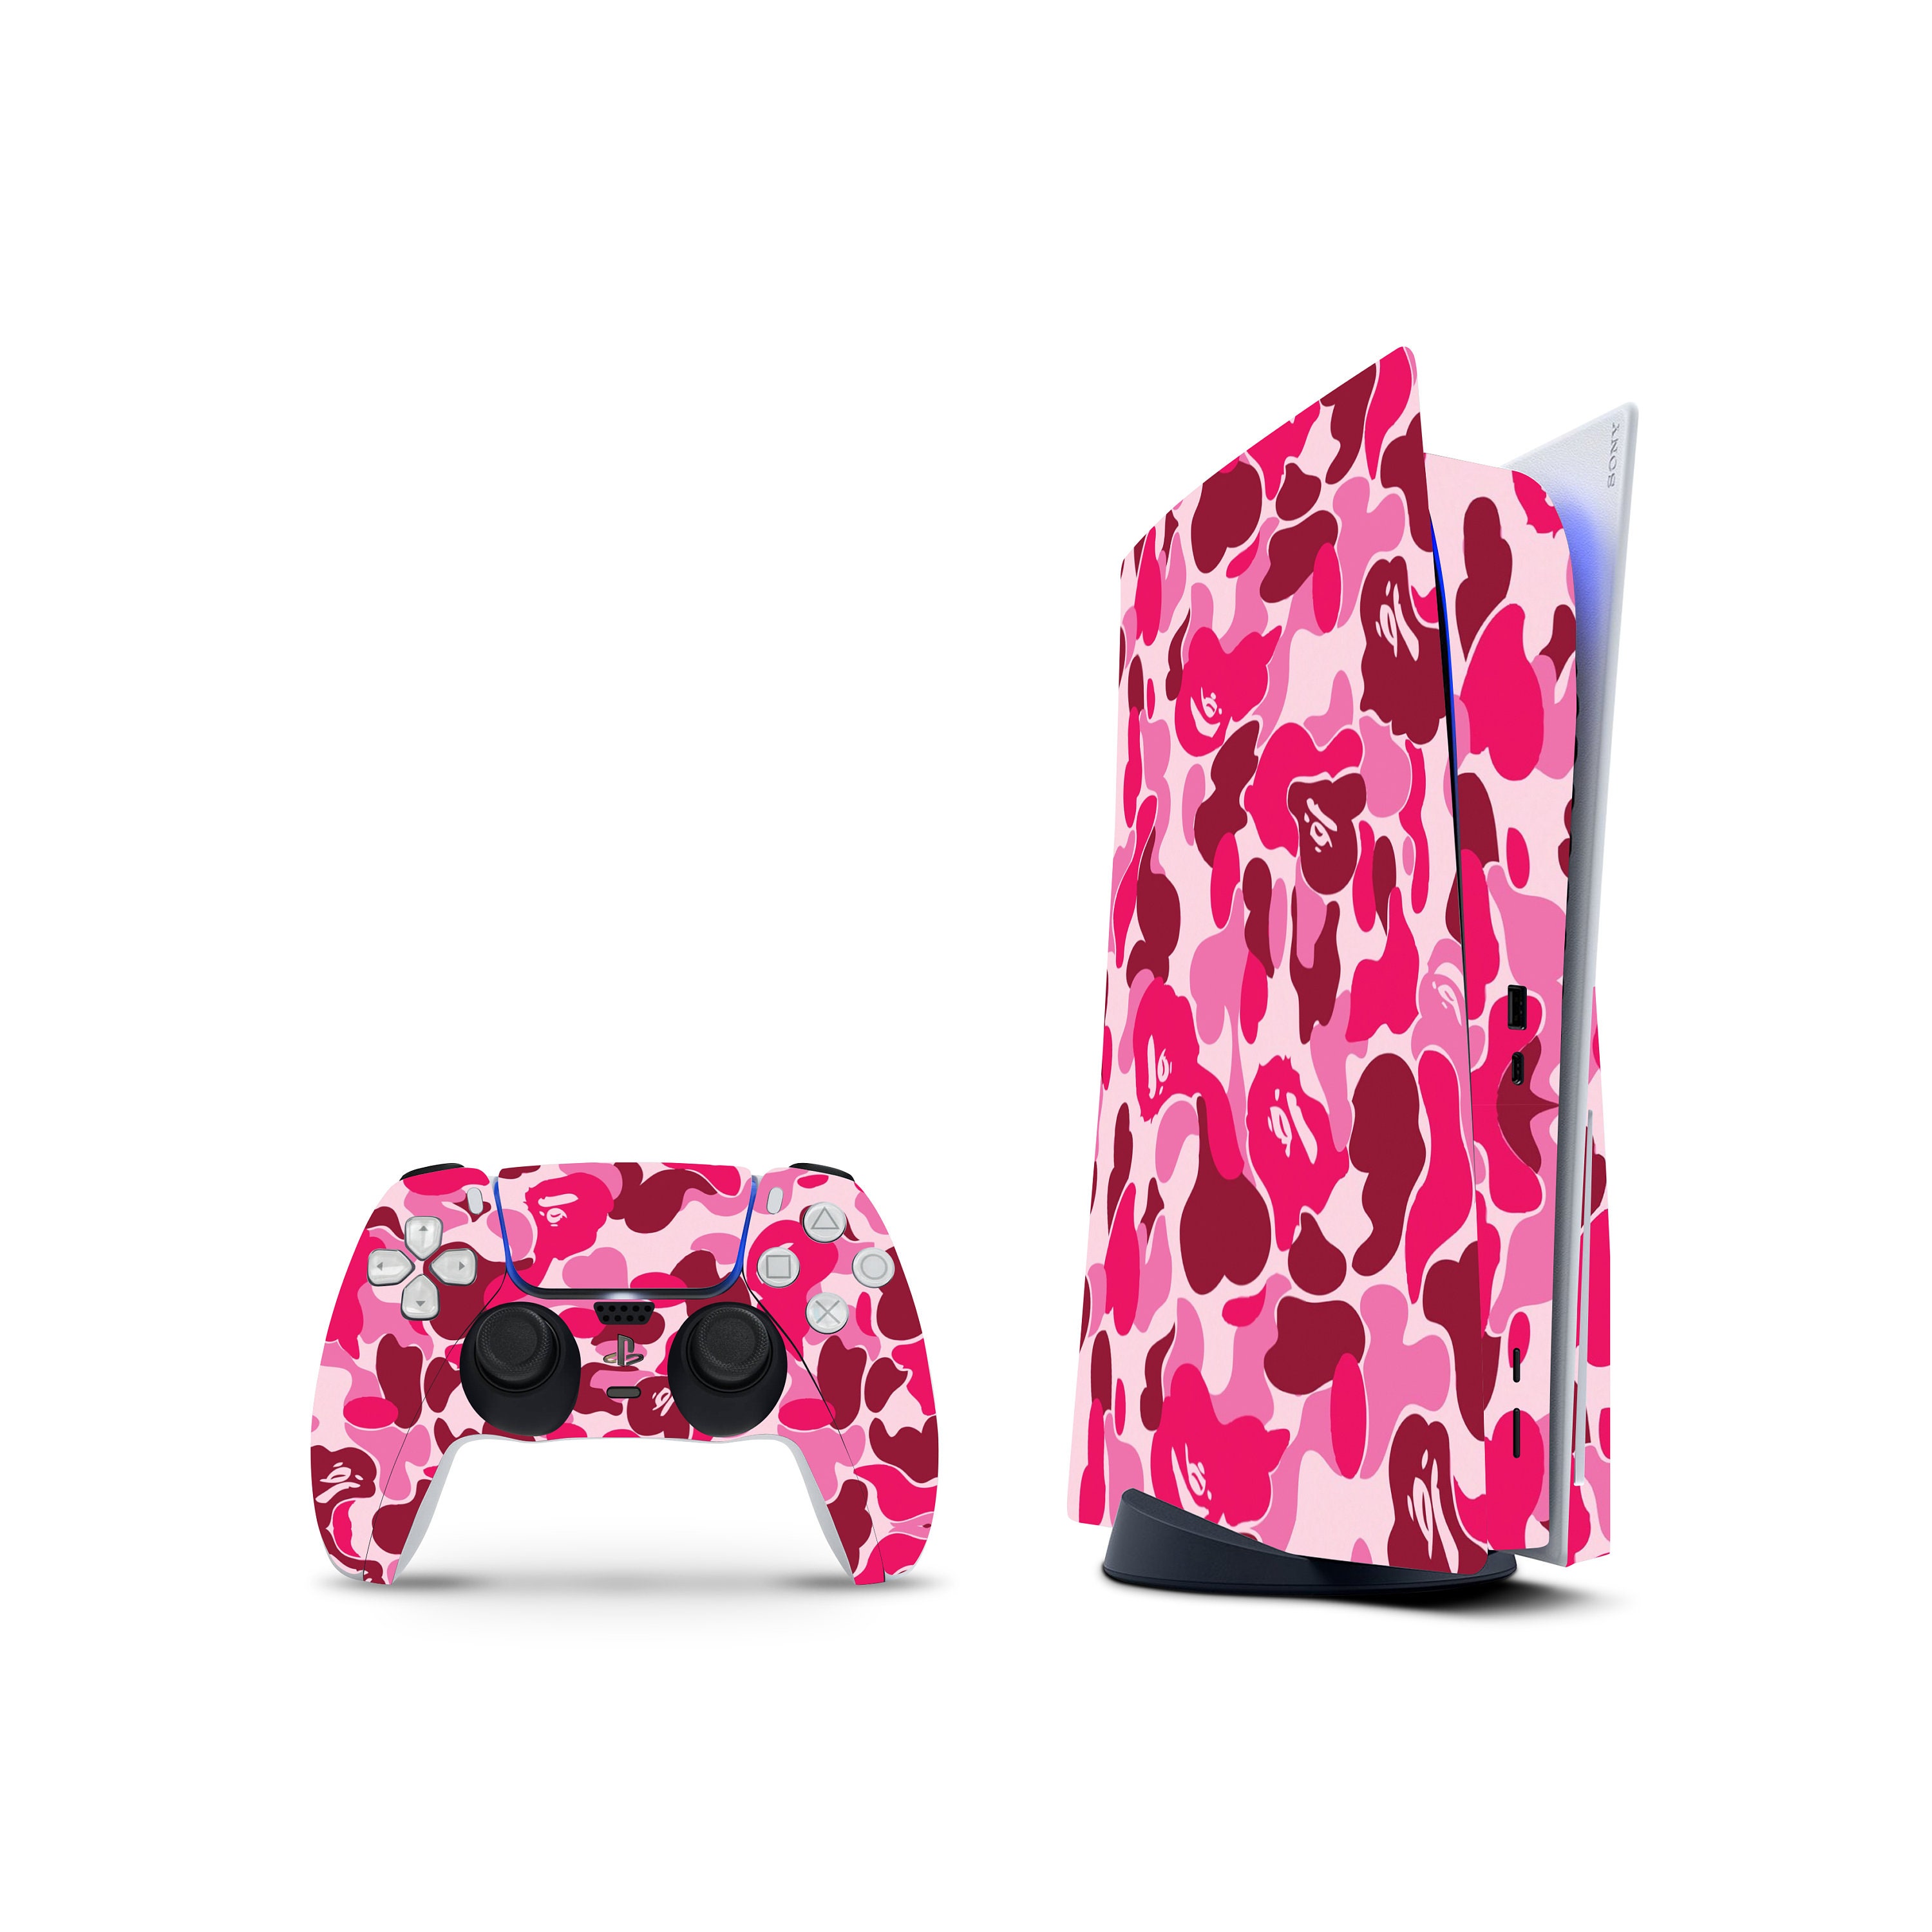 PS4 PRO Console Pink CAMO Skin Decal Vinal Sticker + 2 Controller Skins Set